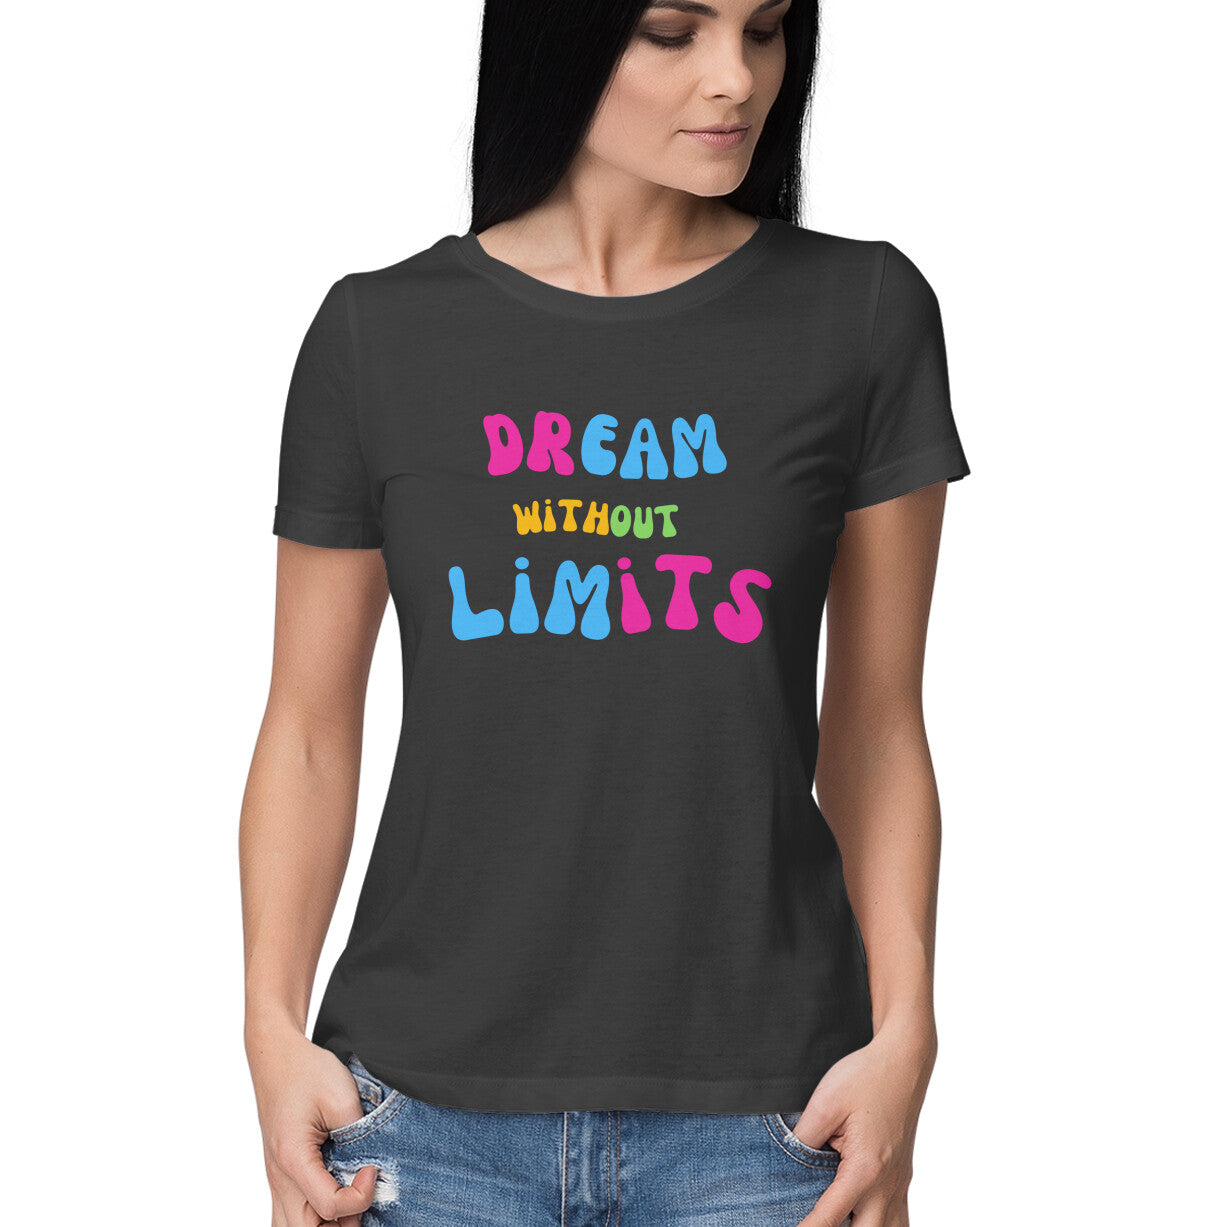 Women's Colorful Motivational Typography T-Shirt